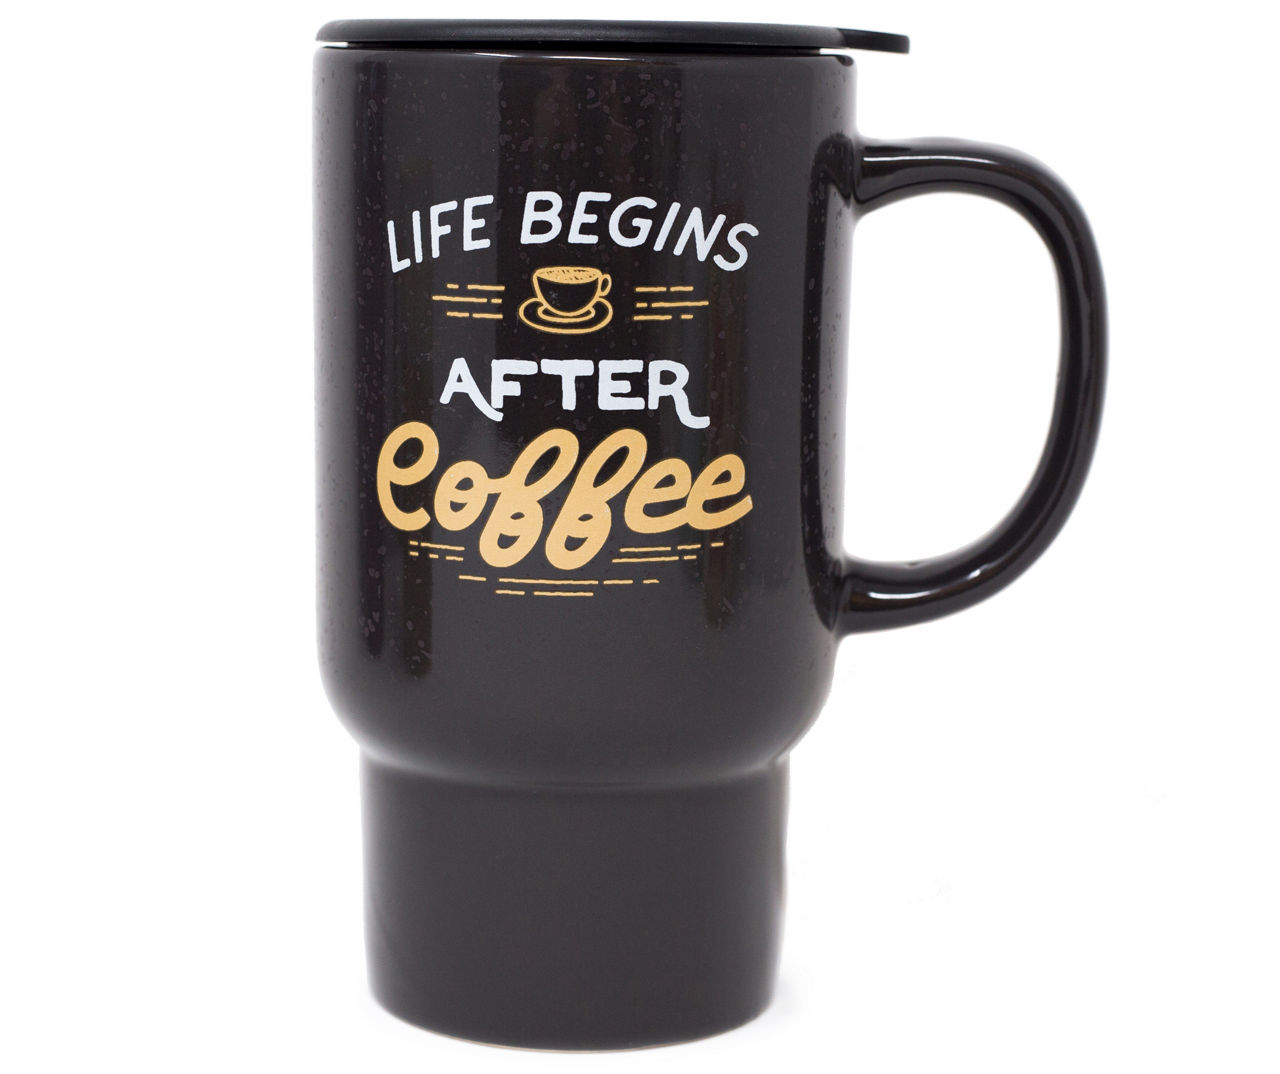 Everything Starts With A Dream Metal Coffee and Tea Travel Mug